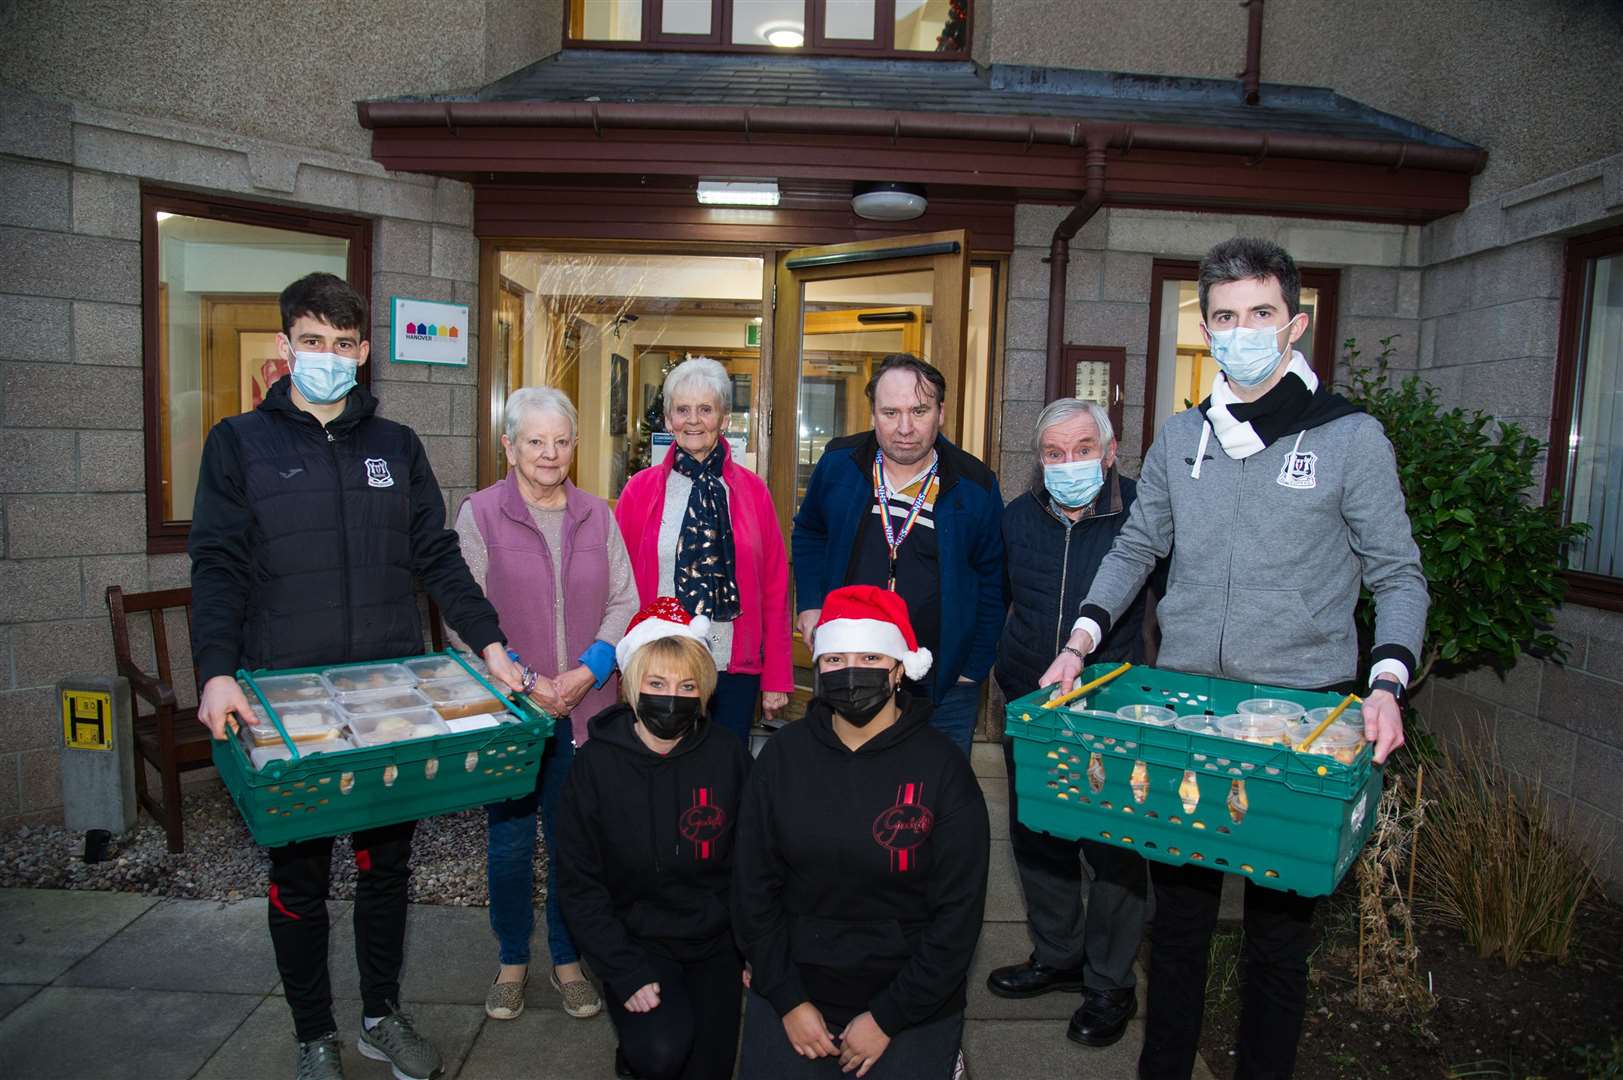 Elgin City player Rory MacEwan (left) and general manager Keiran Carty (right) join Salt Cellar staff to handover meals to West Park Court residents. Picture: Becky Saunderson